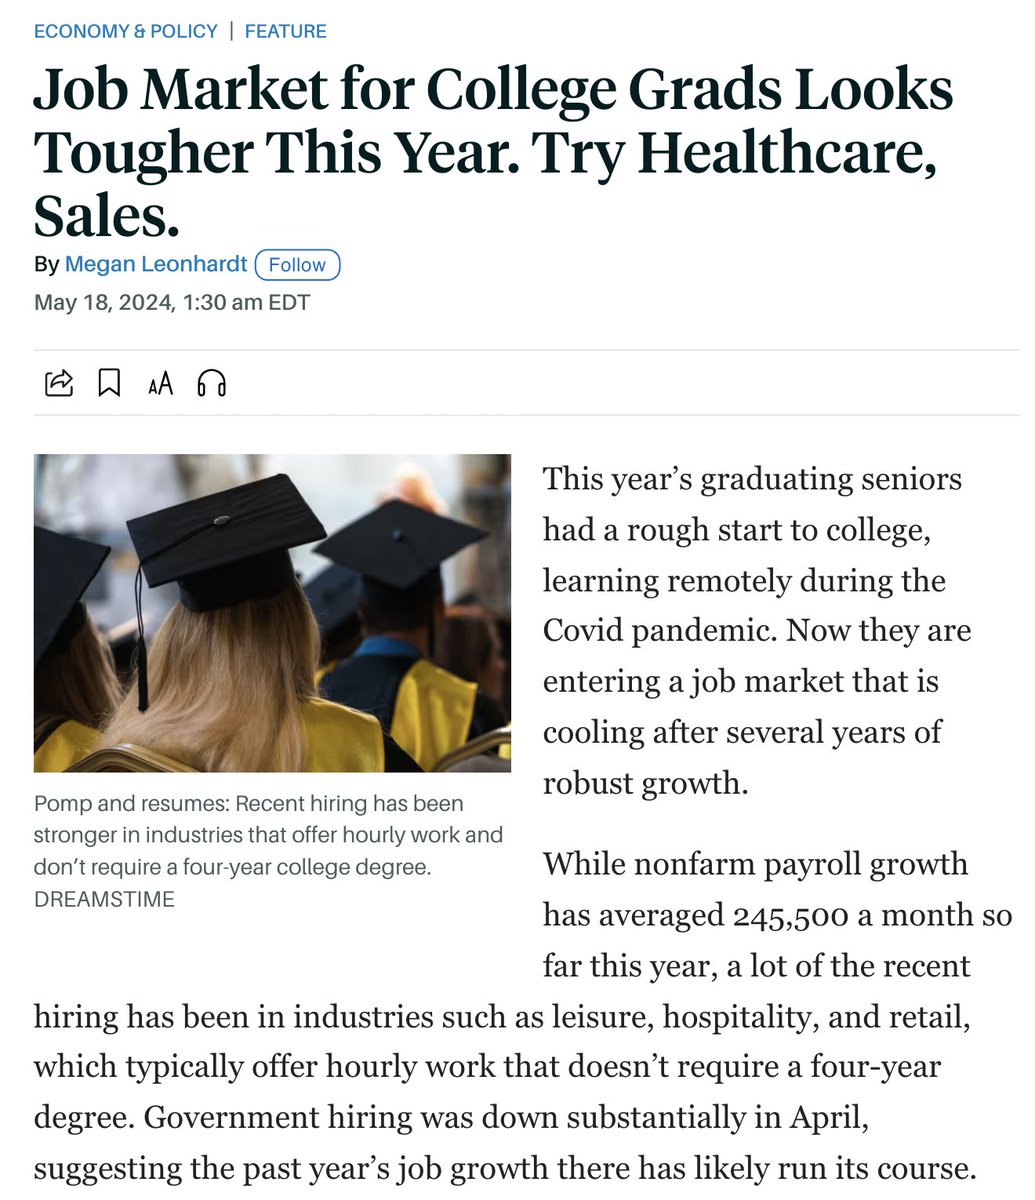 :mortar_board: Looking to kickstart your career after graduation? Check out healthcare or sales. Our Sr. Economist @rachelsederberg shared her insights (and data) on grads entering the job market with @Megan_Leonhardt at @barronsonline. bit.ly/4bIM1XG